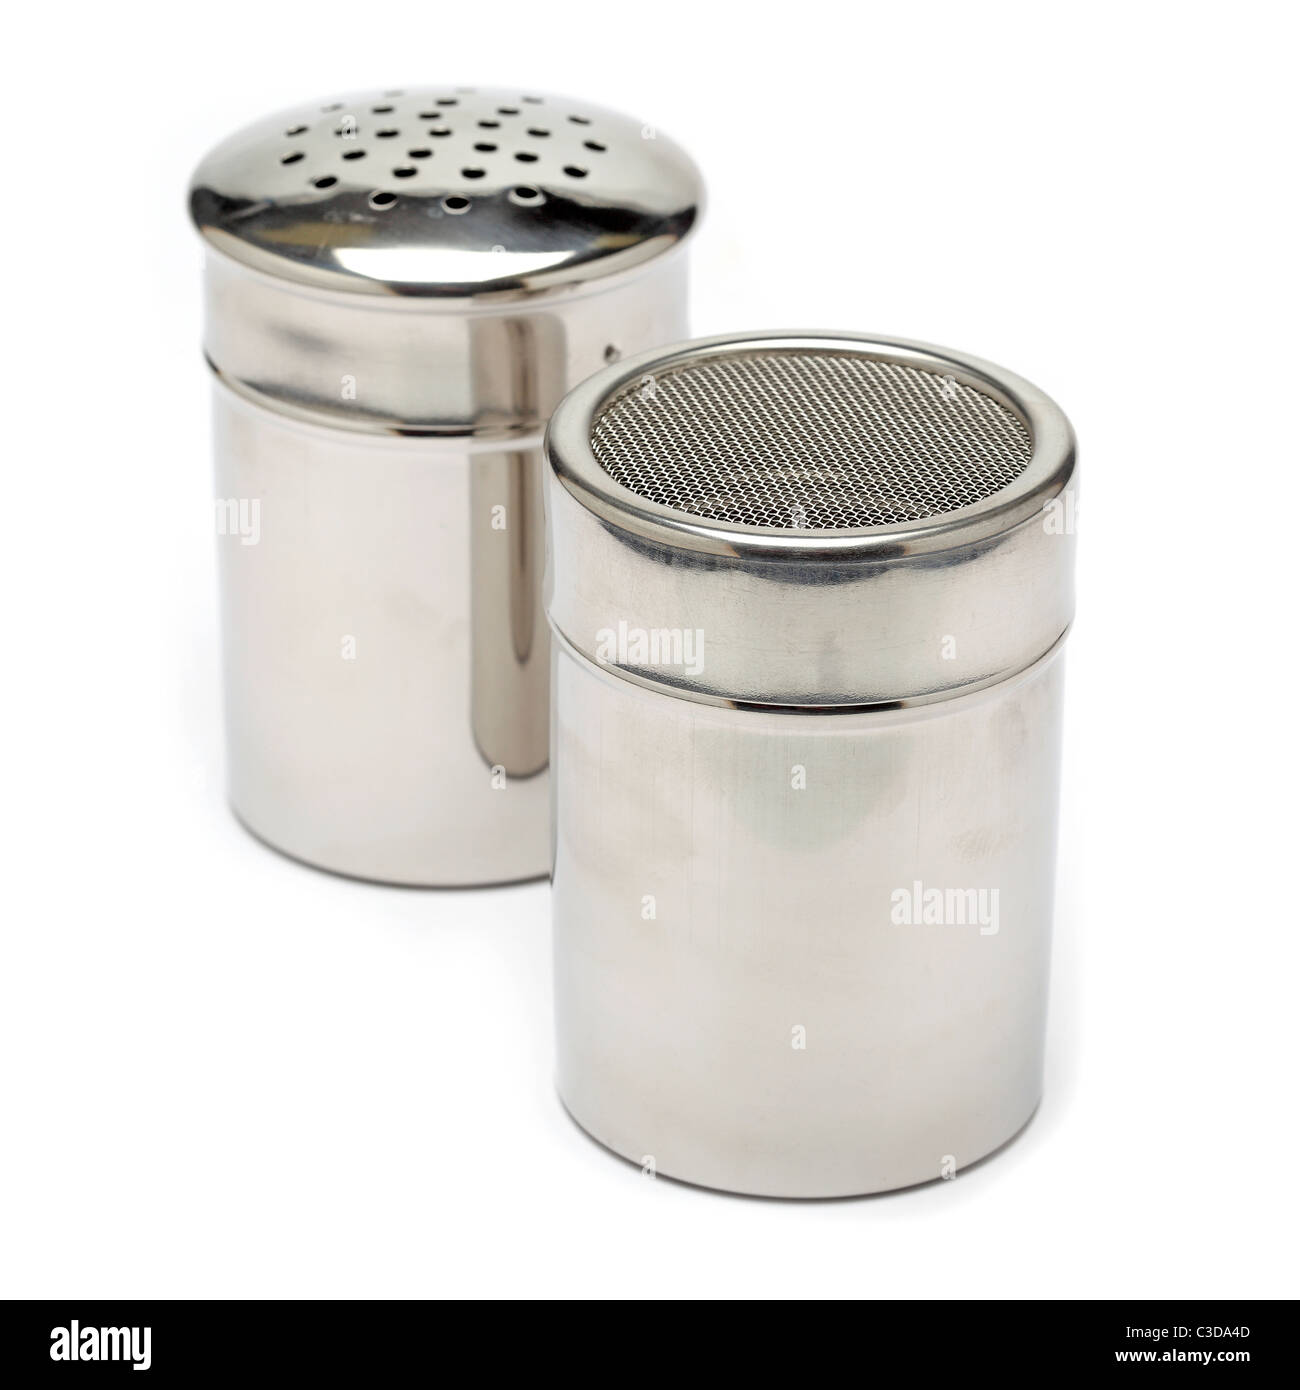 canister sugar shaker Stock Photo